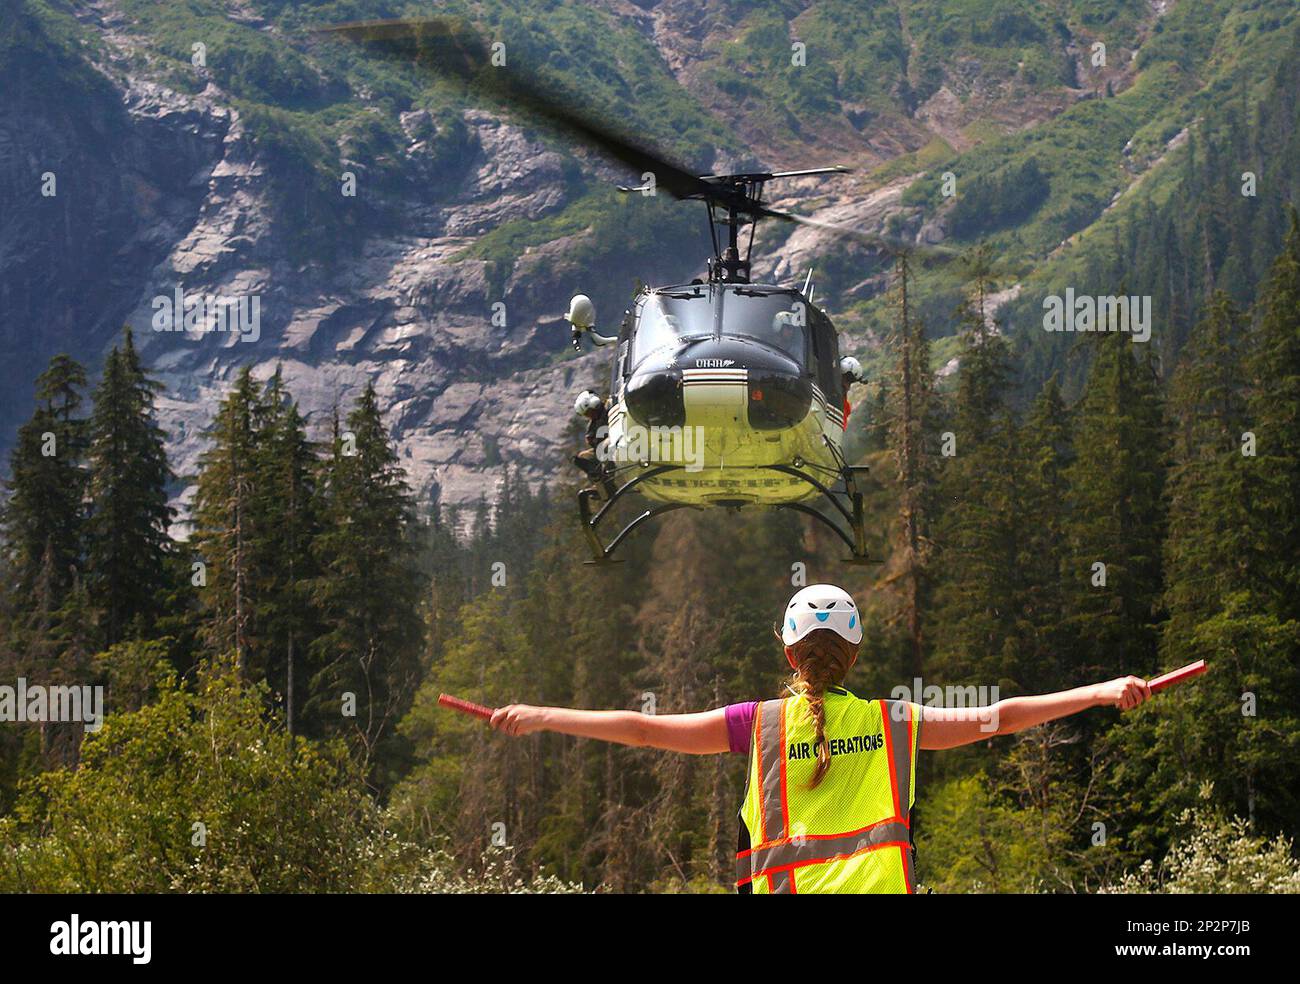 https://c8.alamy.com/comp/2P2P7JB/katherine-jordan-with-snohomish-county-search-rescue-directs-a-helicopter-onto-a-landing-zone-in-the-picnic-area-of-the-big-four-ice-caves-in-washington-to-deliver-equipment-tuesday-july-7-2015-on-tuesday-crews-were-trying-to-recover-the-body-of-a-34-year-old-woman-buried-when-rock-and-ice-fell-at-the-back-of-the-cave-the-ice-caves-area-is-prone-to-avalanches-falling-rocks-and-ice-and-visitors-are-urged-not-to-leave-the-trail-or-enter-the-caves-mark-mulliganthe-herald-via-ap-mandatory-credit-2P2P7JB.jpg